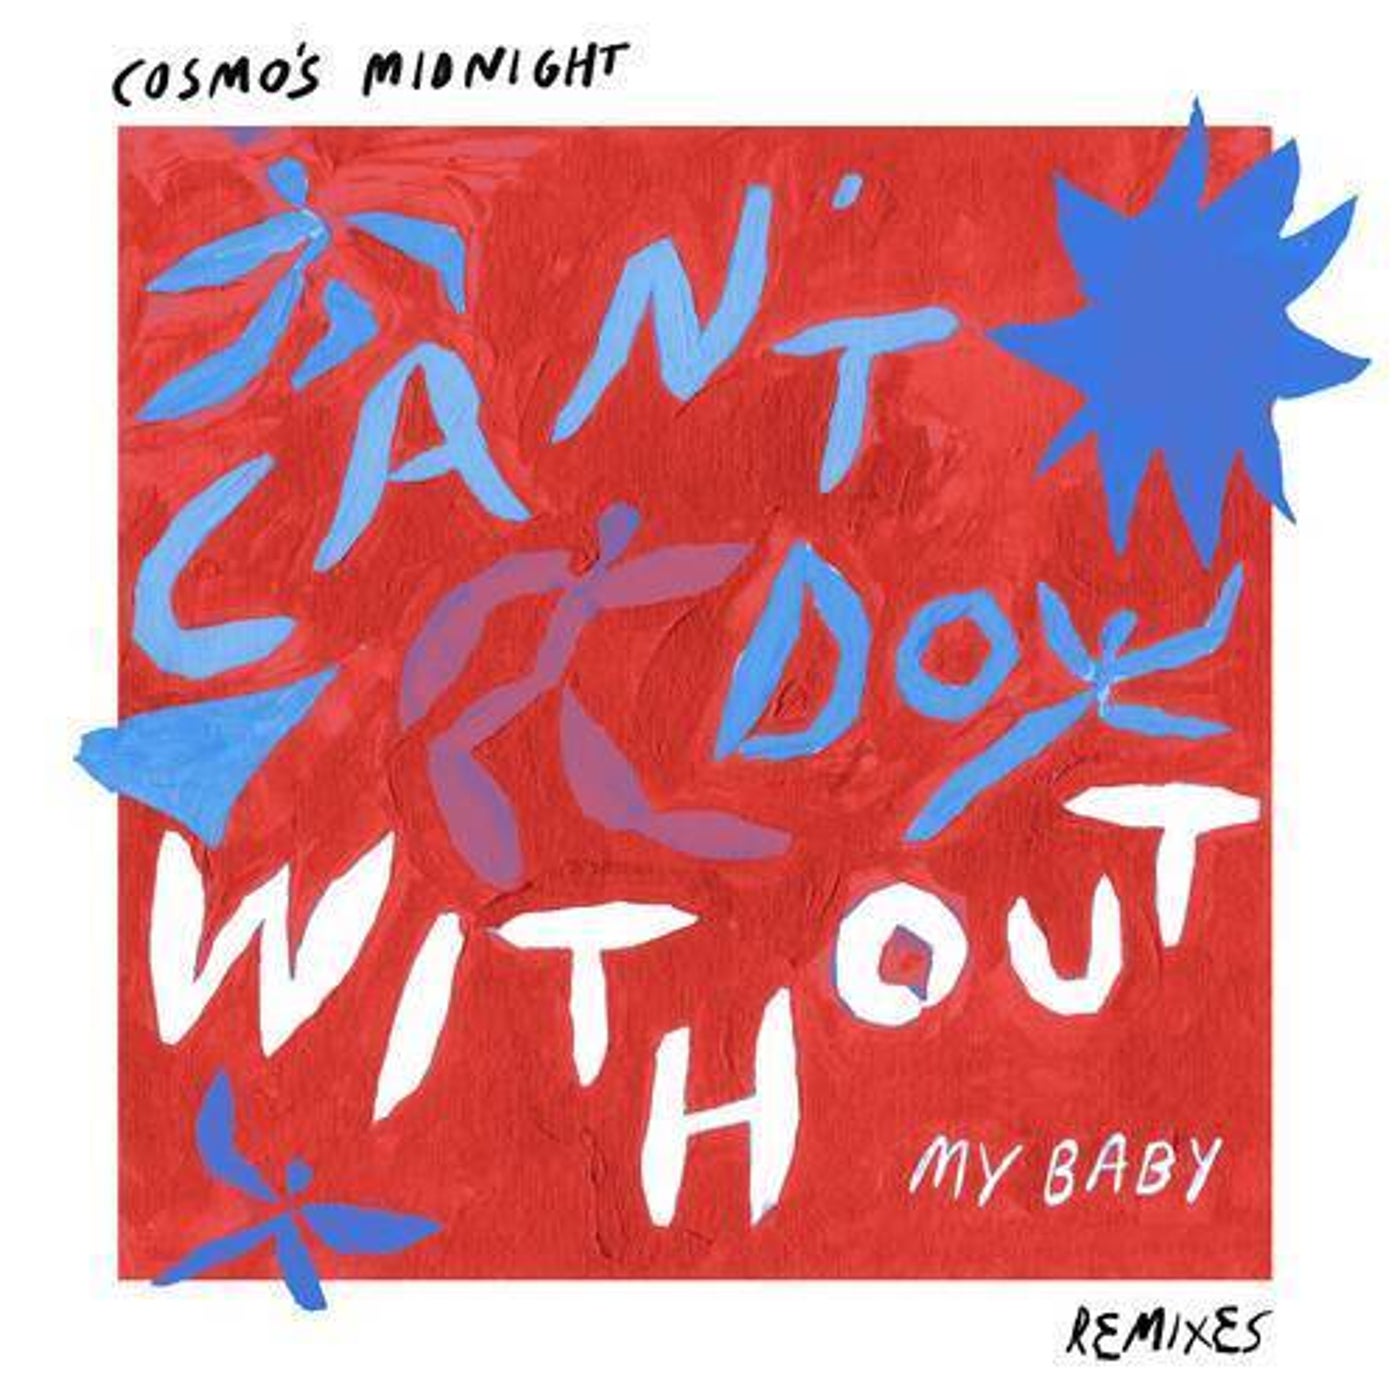 Can't Do Without (My Baby) [Remixes]